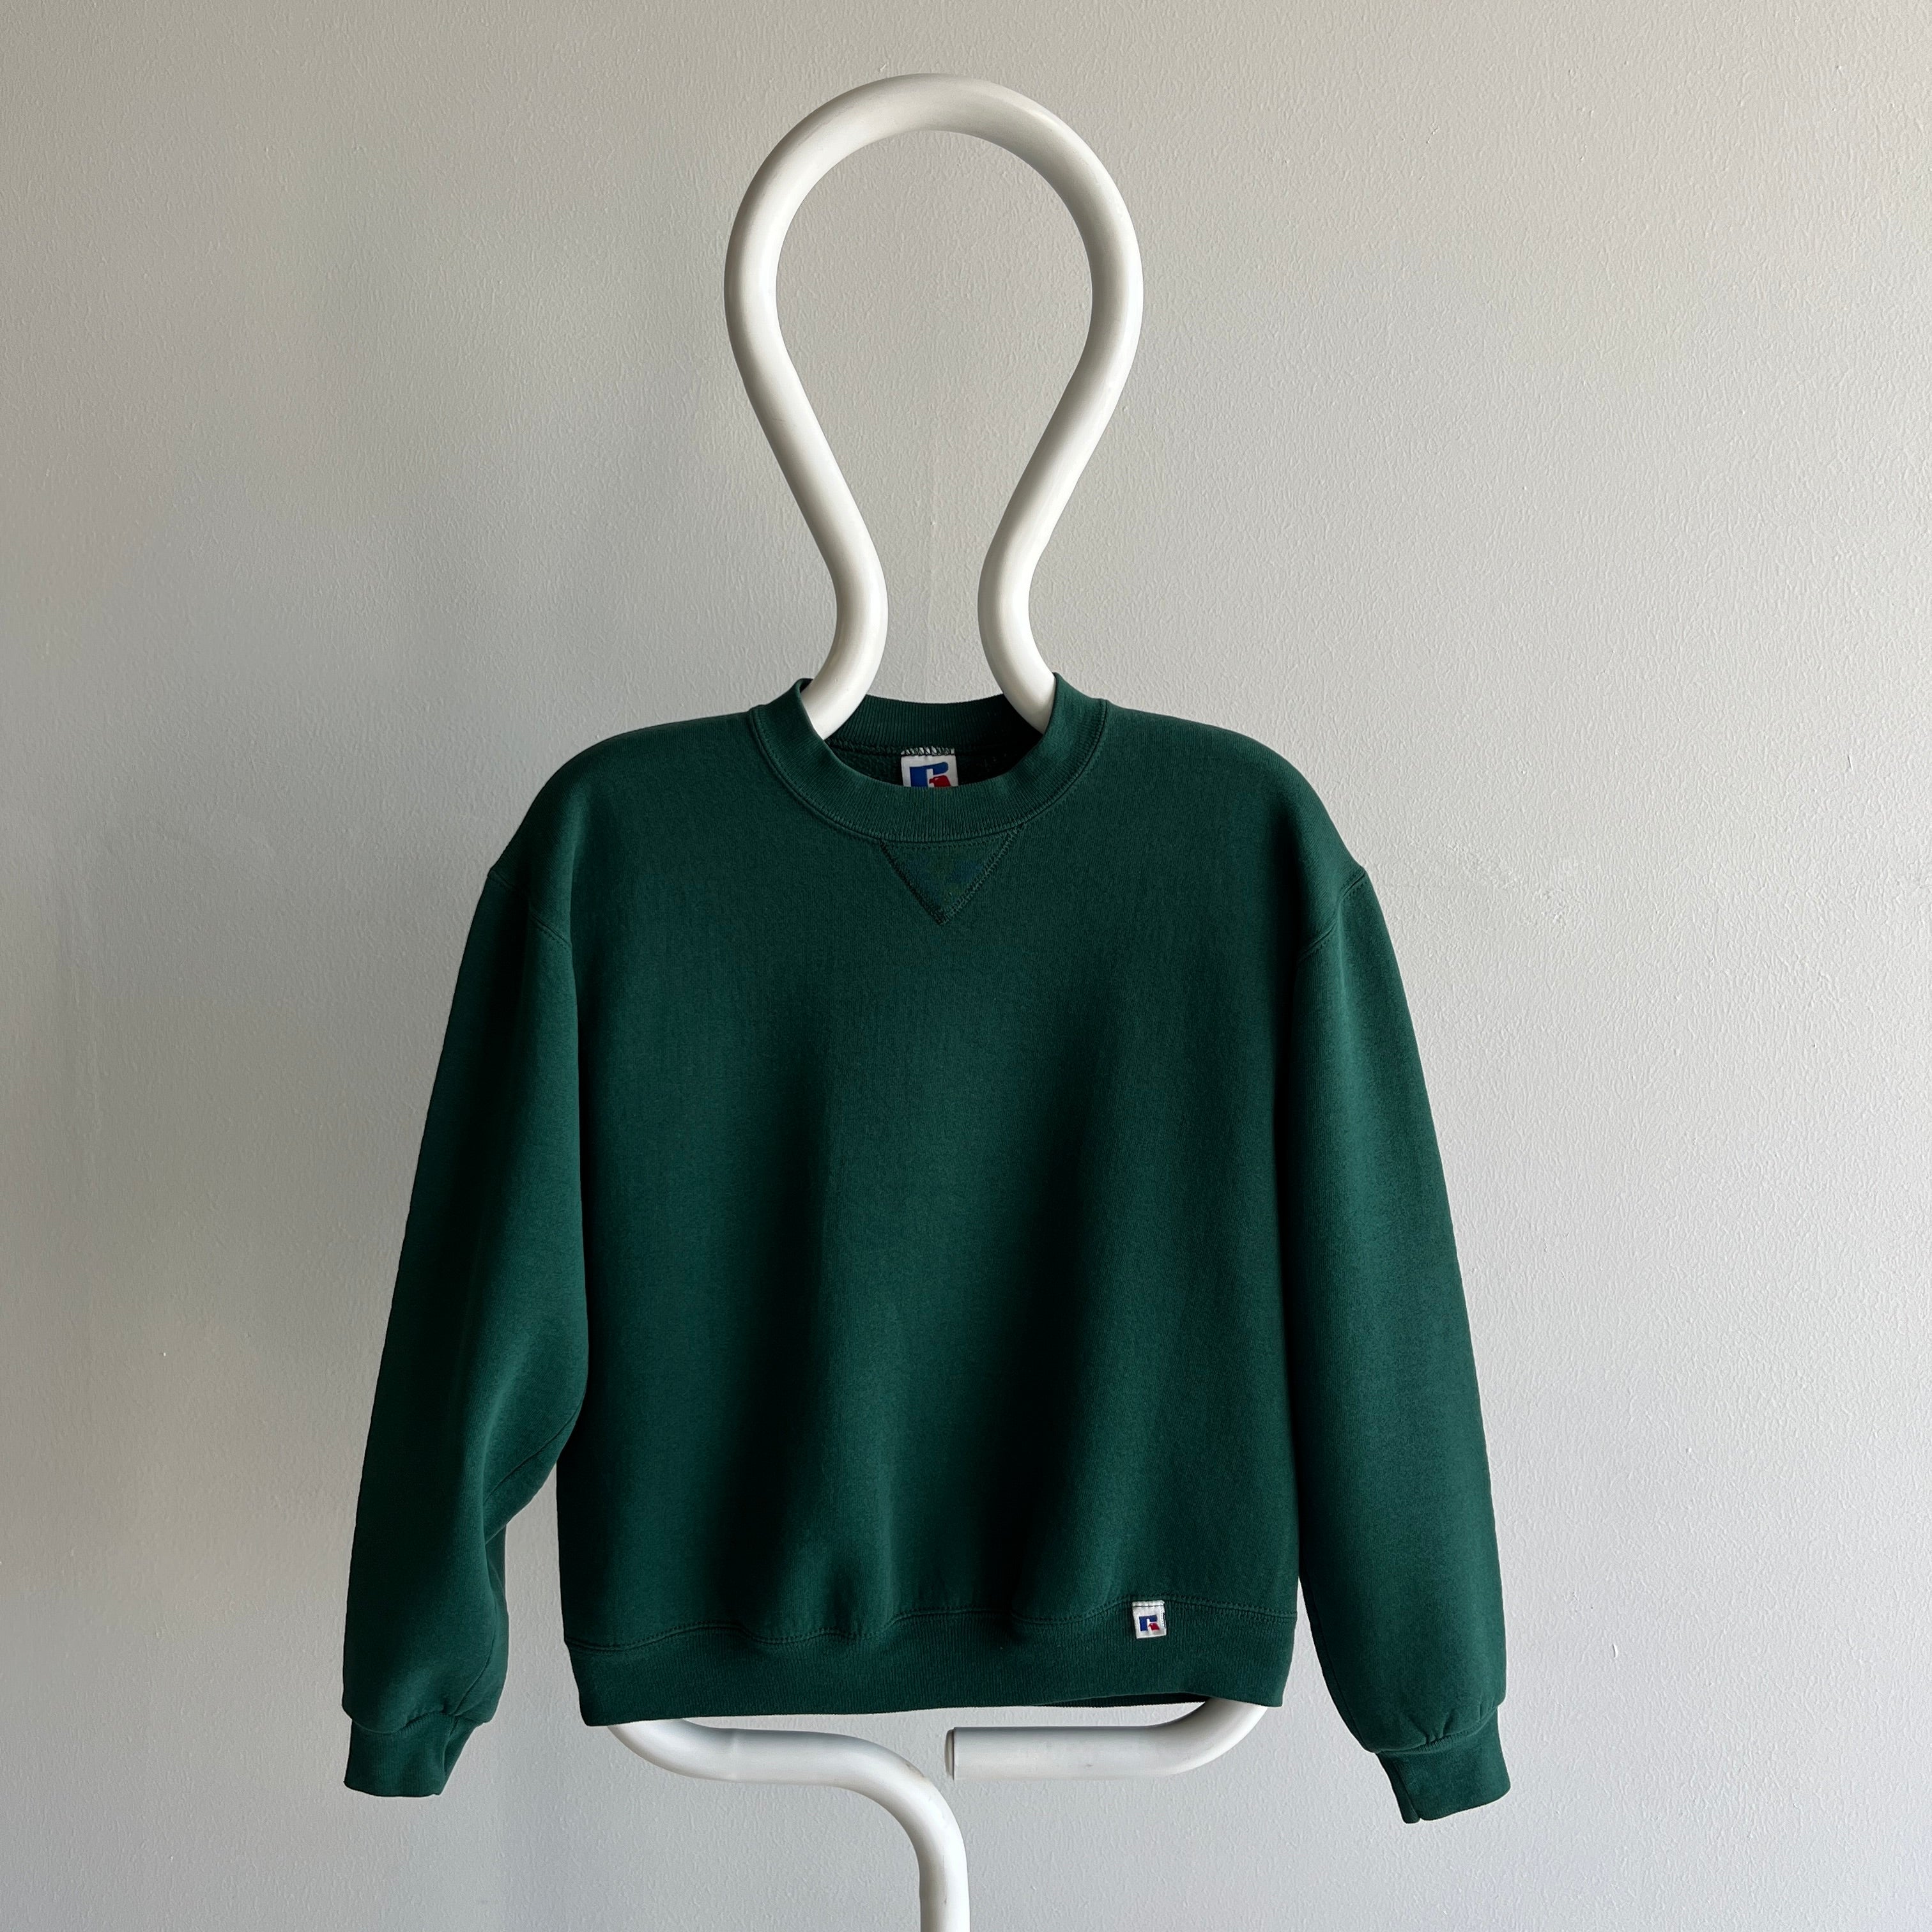 Vintage 90's Forest Green Classic Fly Fishing Sweatshirt XL 